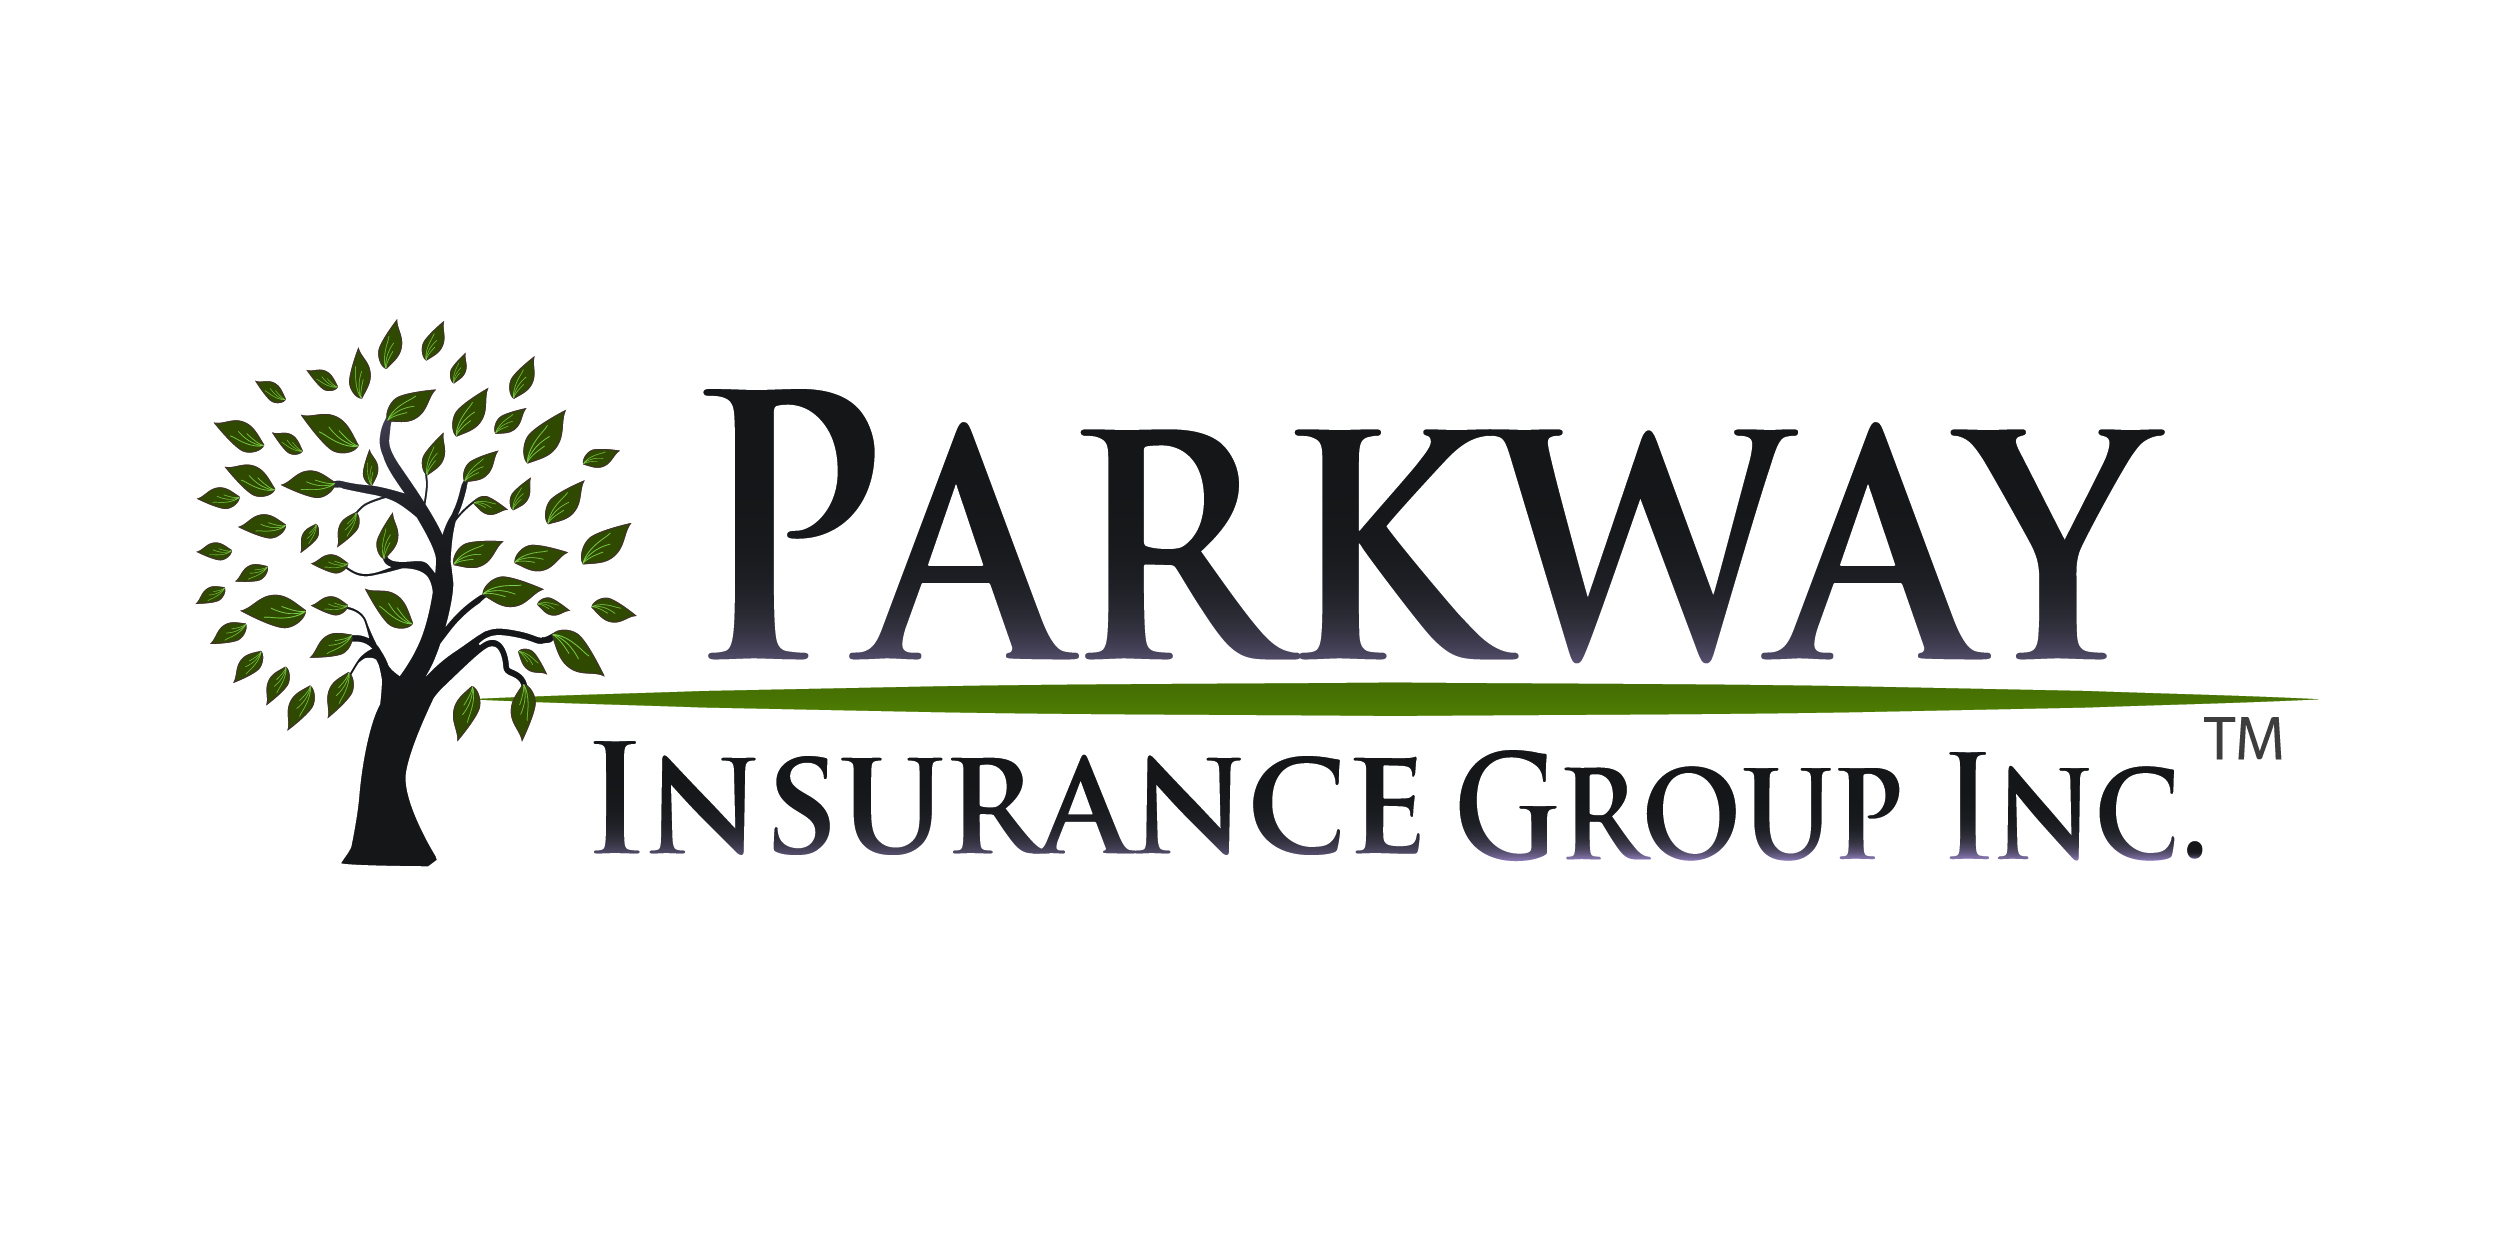 Parkway Insurance Group, Inc